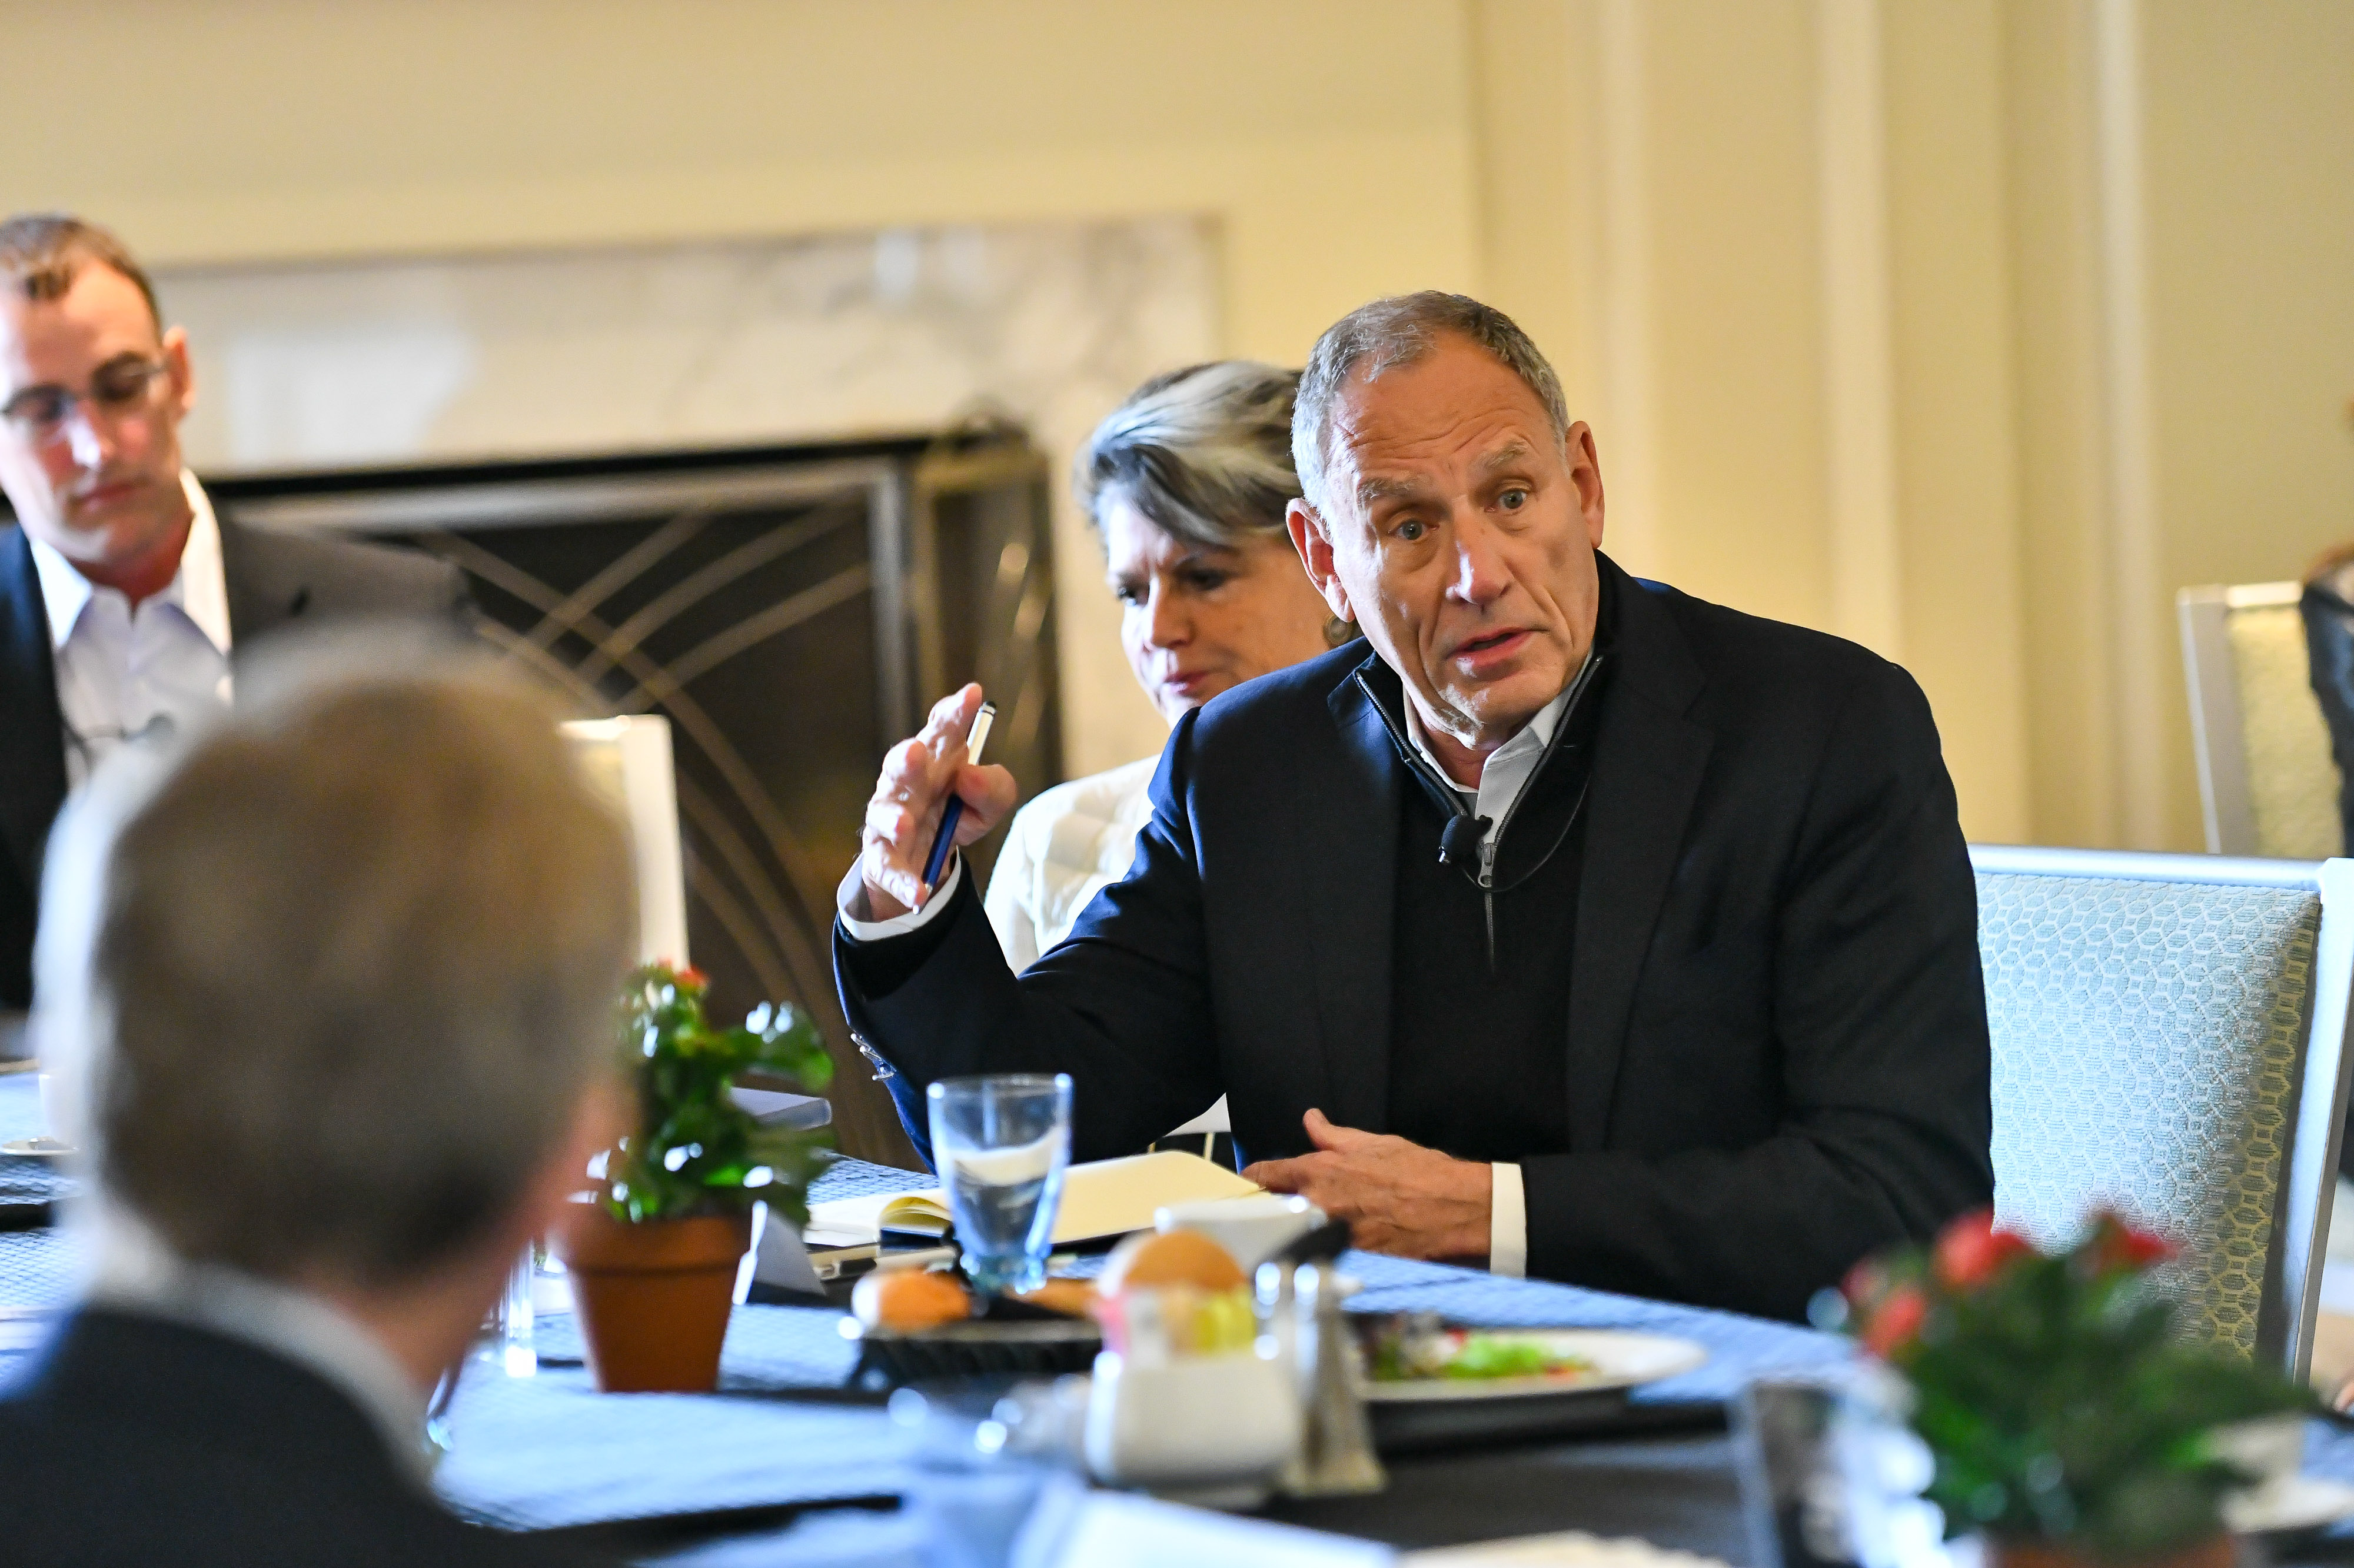 Dr. Toby Cosgrove, Former President and CEO, Cleveland Clinic talks about cutting health care costs at Fortune Brainstorm Health 2018. (Photograph by Stuart Isett for F&mdash;Photograph by Stuart Isett for F)